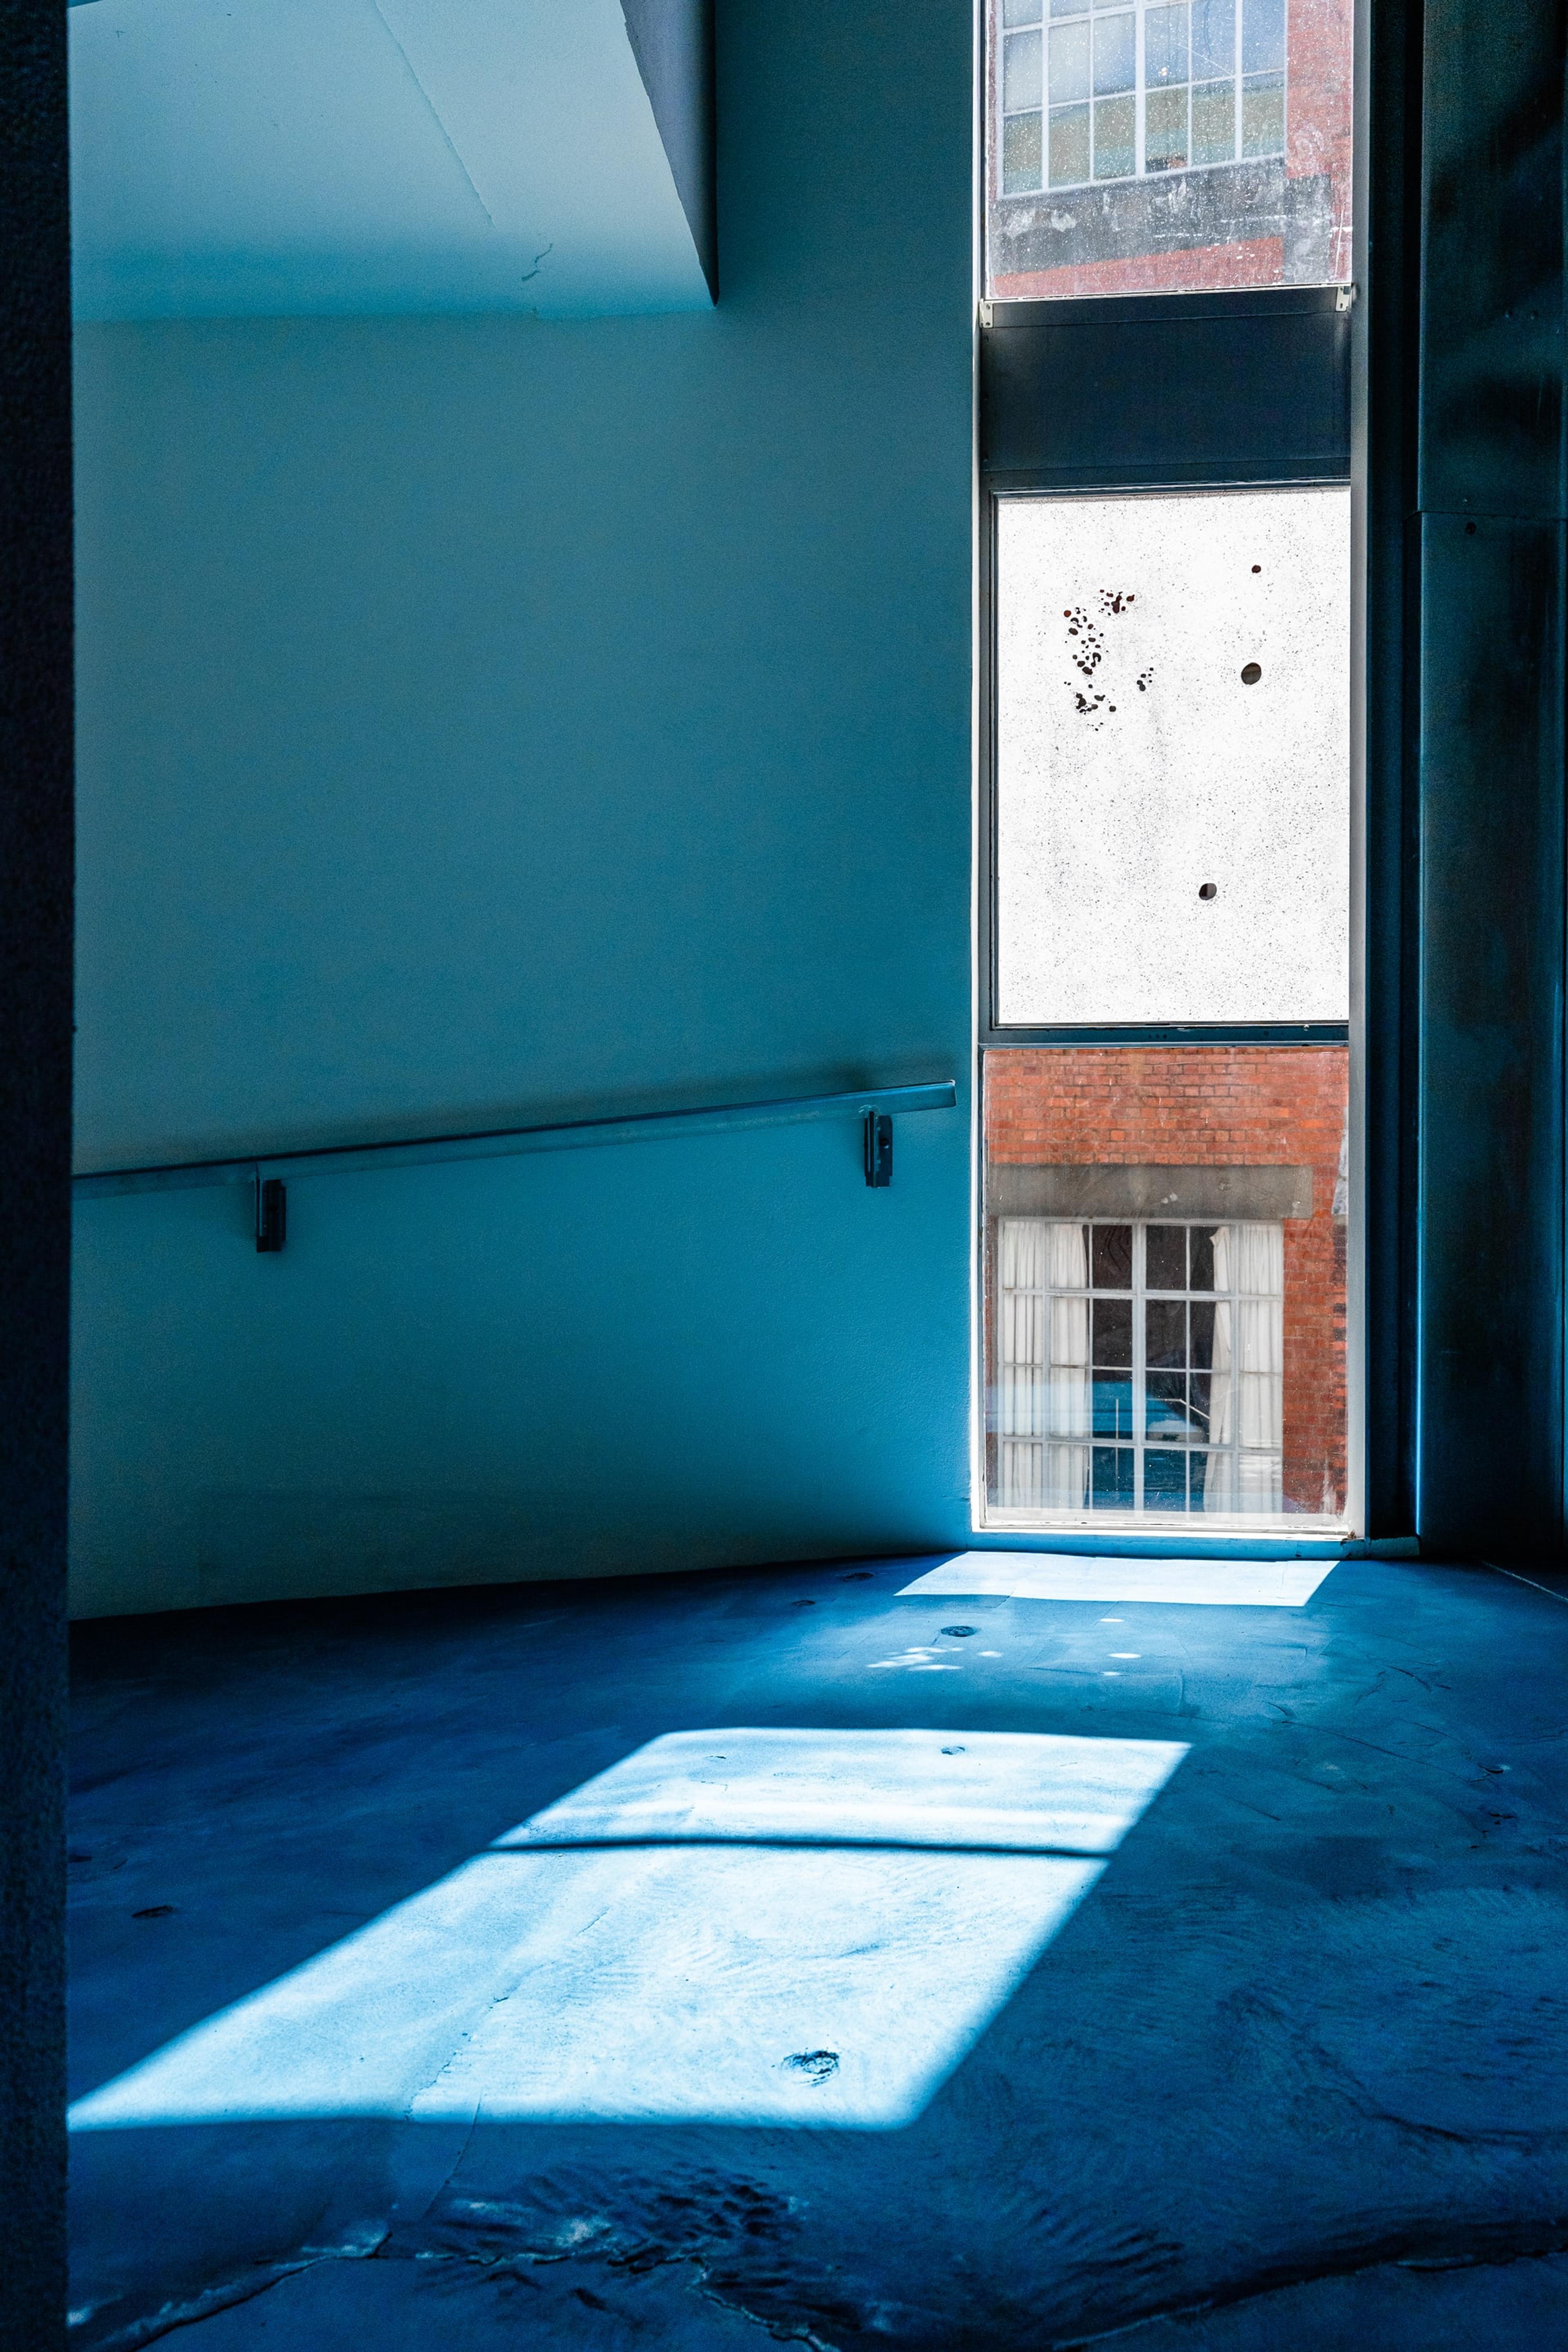 A view of the textured blue ground inside the gallery, with sunlight streaming in and blue light reflecting up onto the white walls. Outside the window is brick building, and one of the windows is frosted glass with several round holes in it